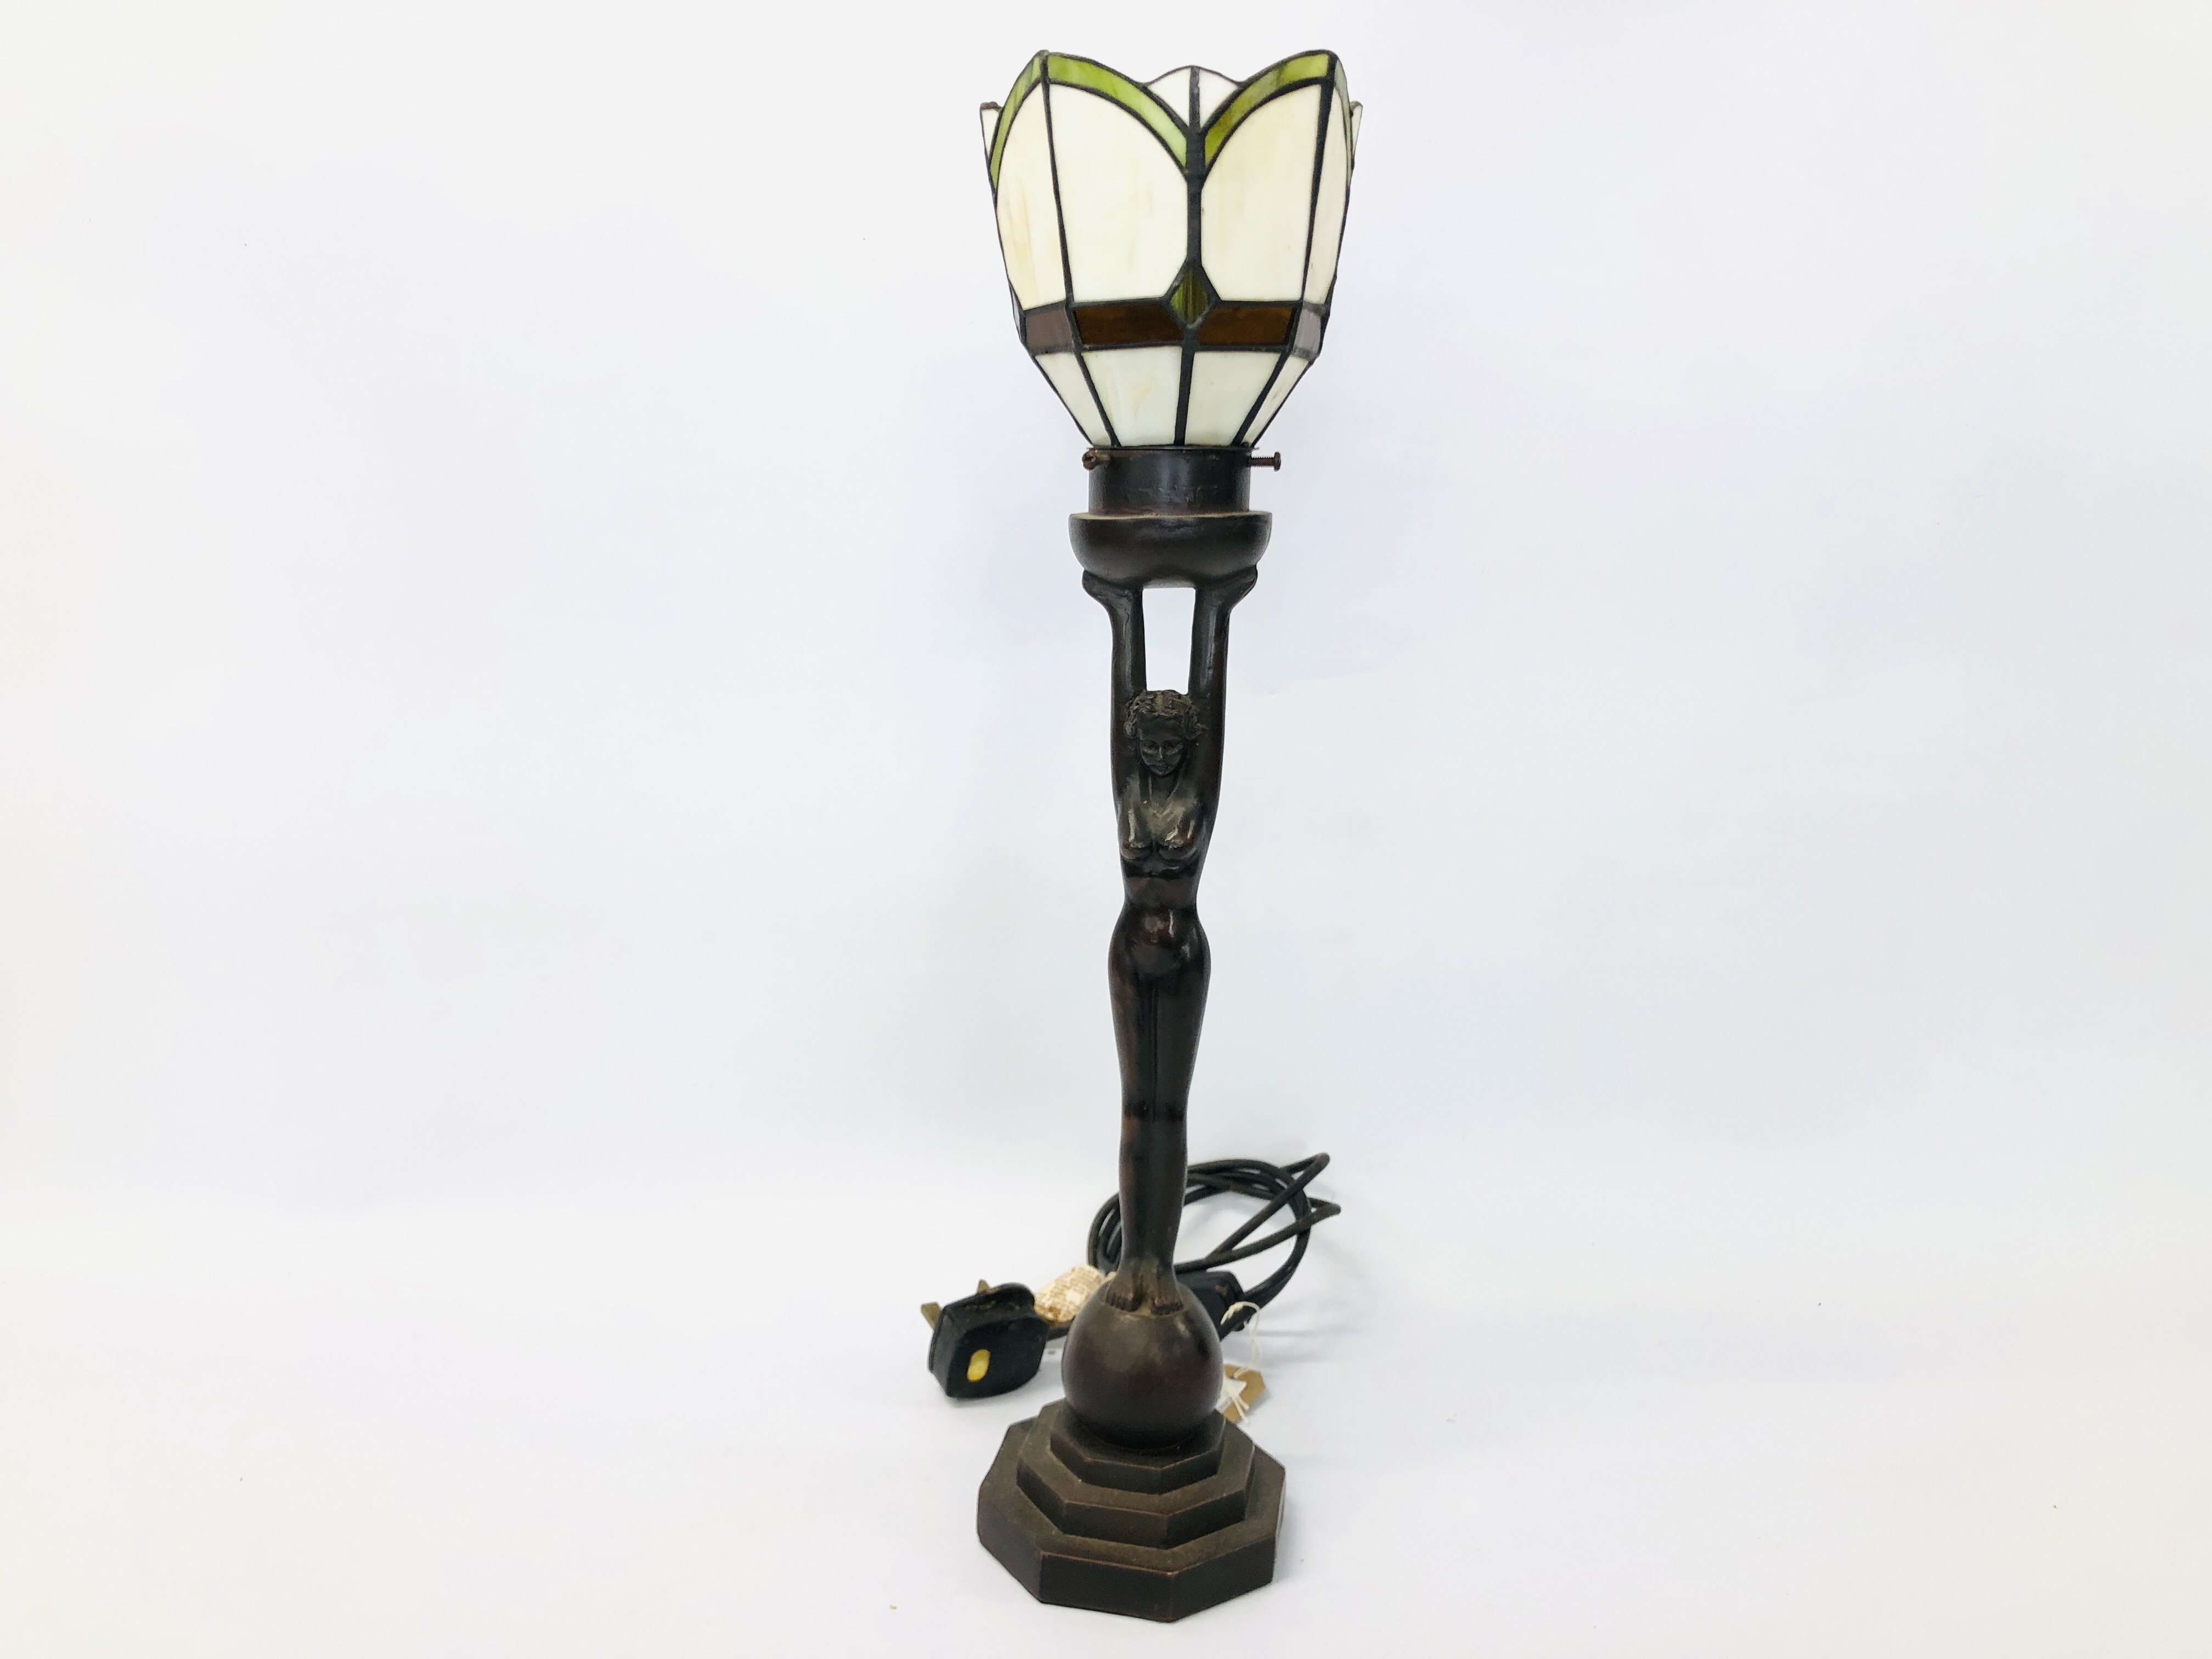 REPRODUCTION DECO STYLE TABLE LAMP THE GLASS STAIN GLASS SHADE SUPPORTED BY NUDE FEMALE STANDING ON